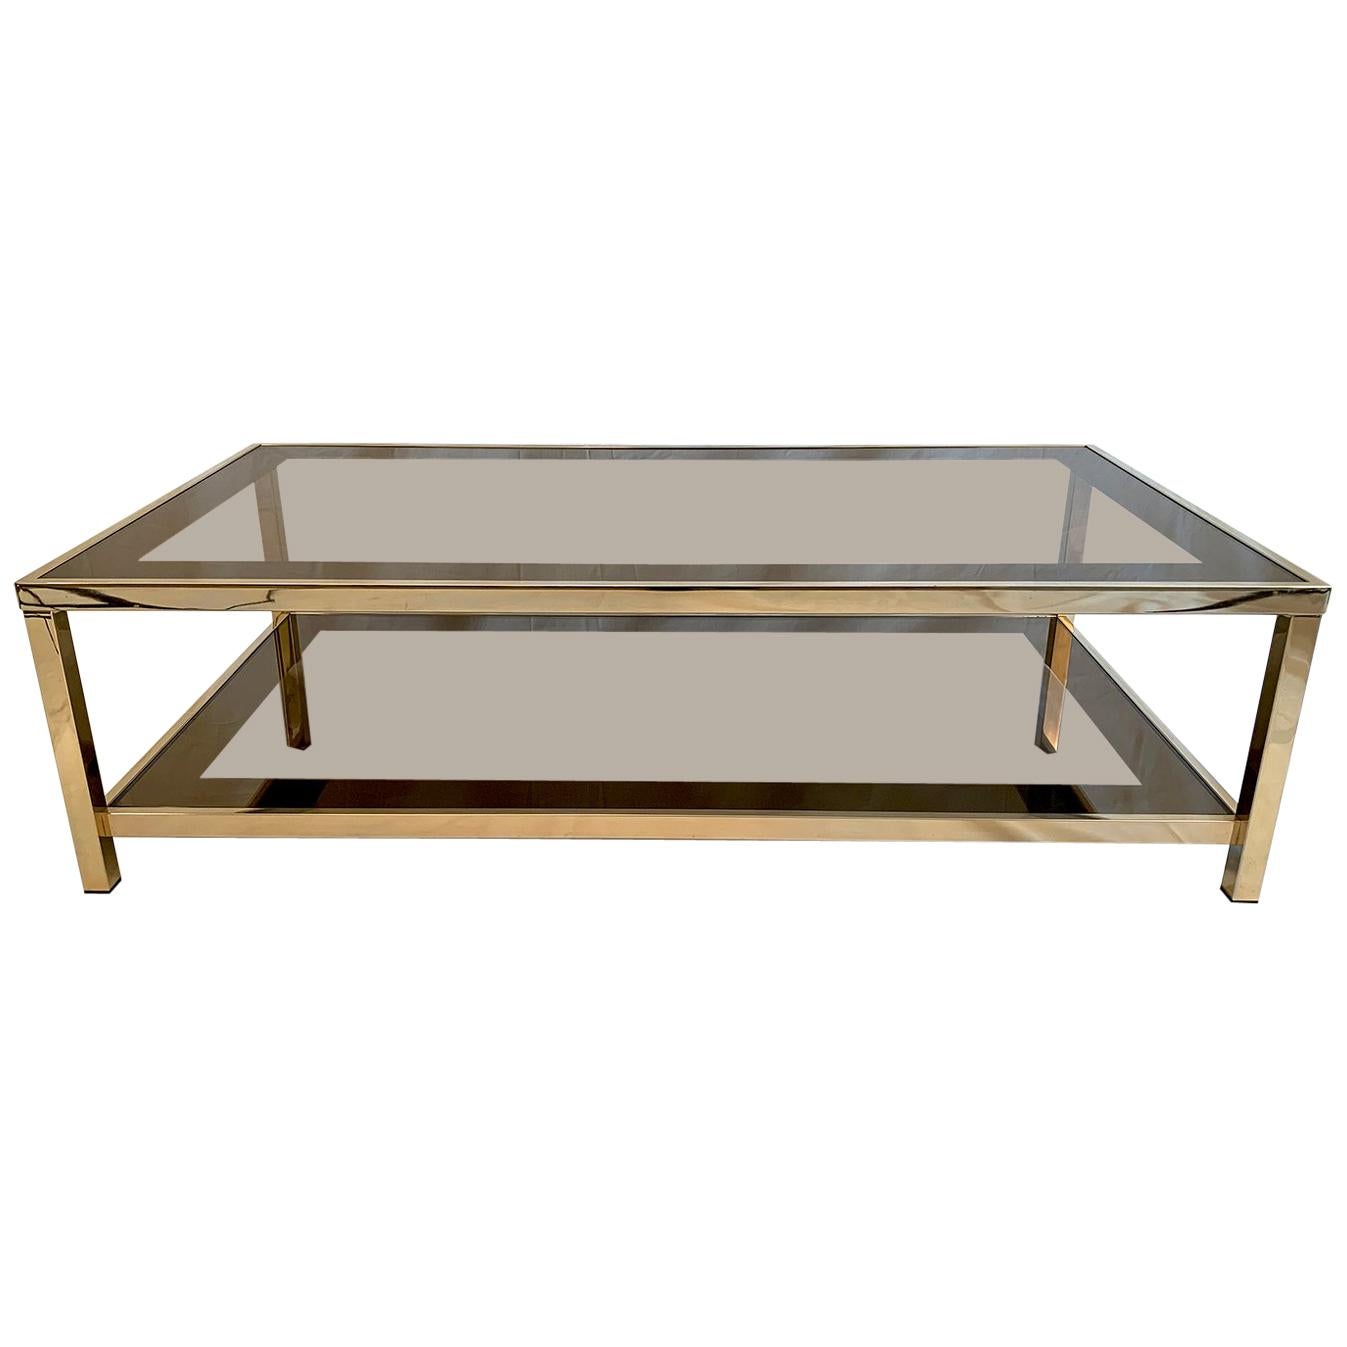 23-Karat Gold-Plated Two-Tier Coffee Table by Belgo Chrome For Sale